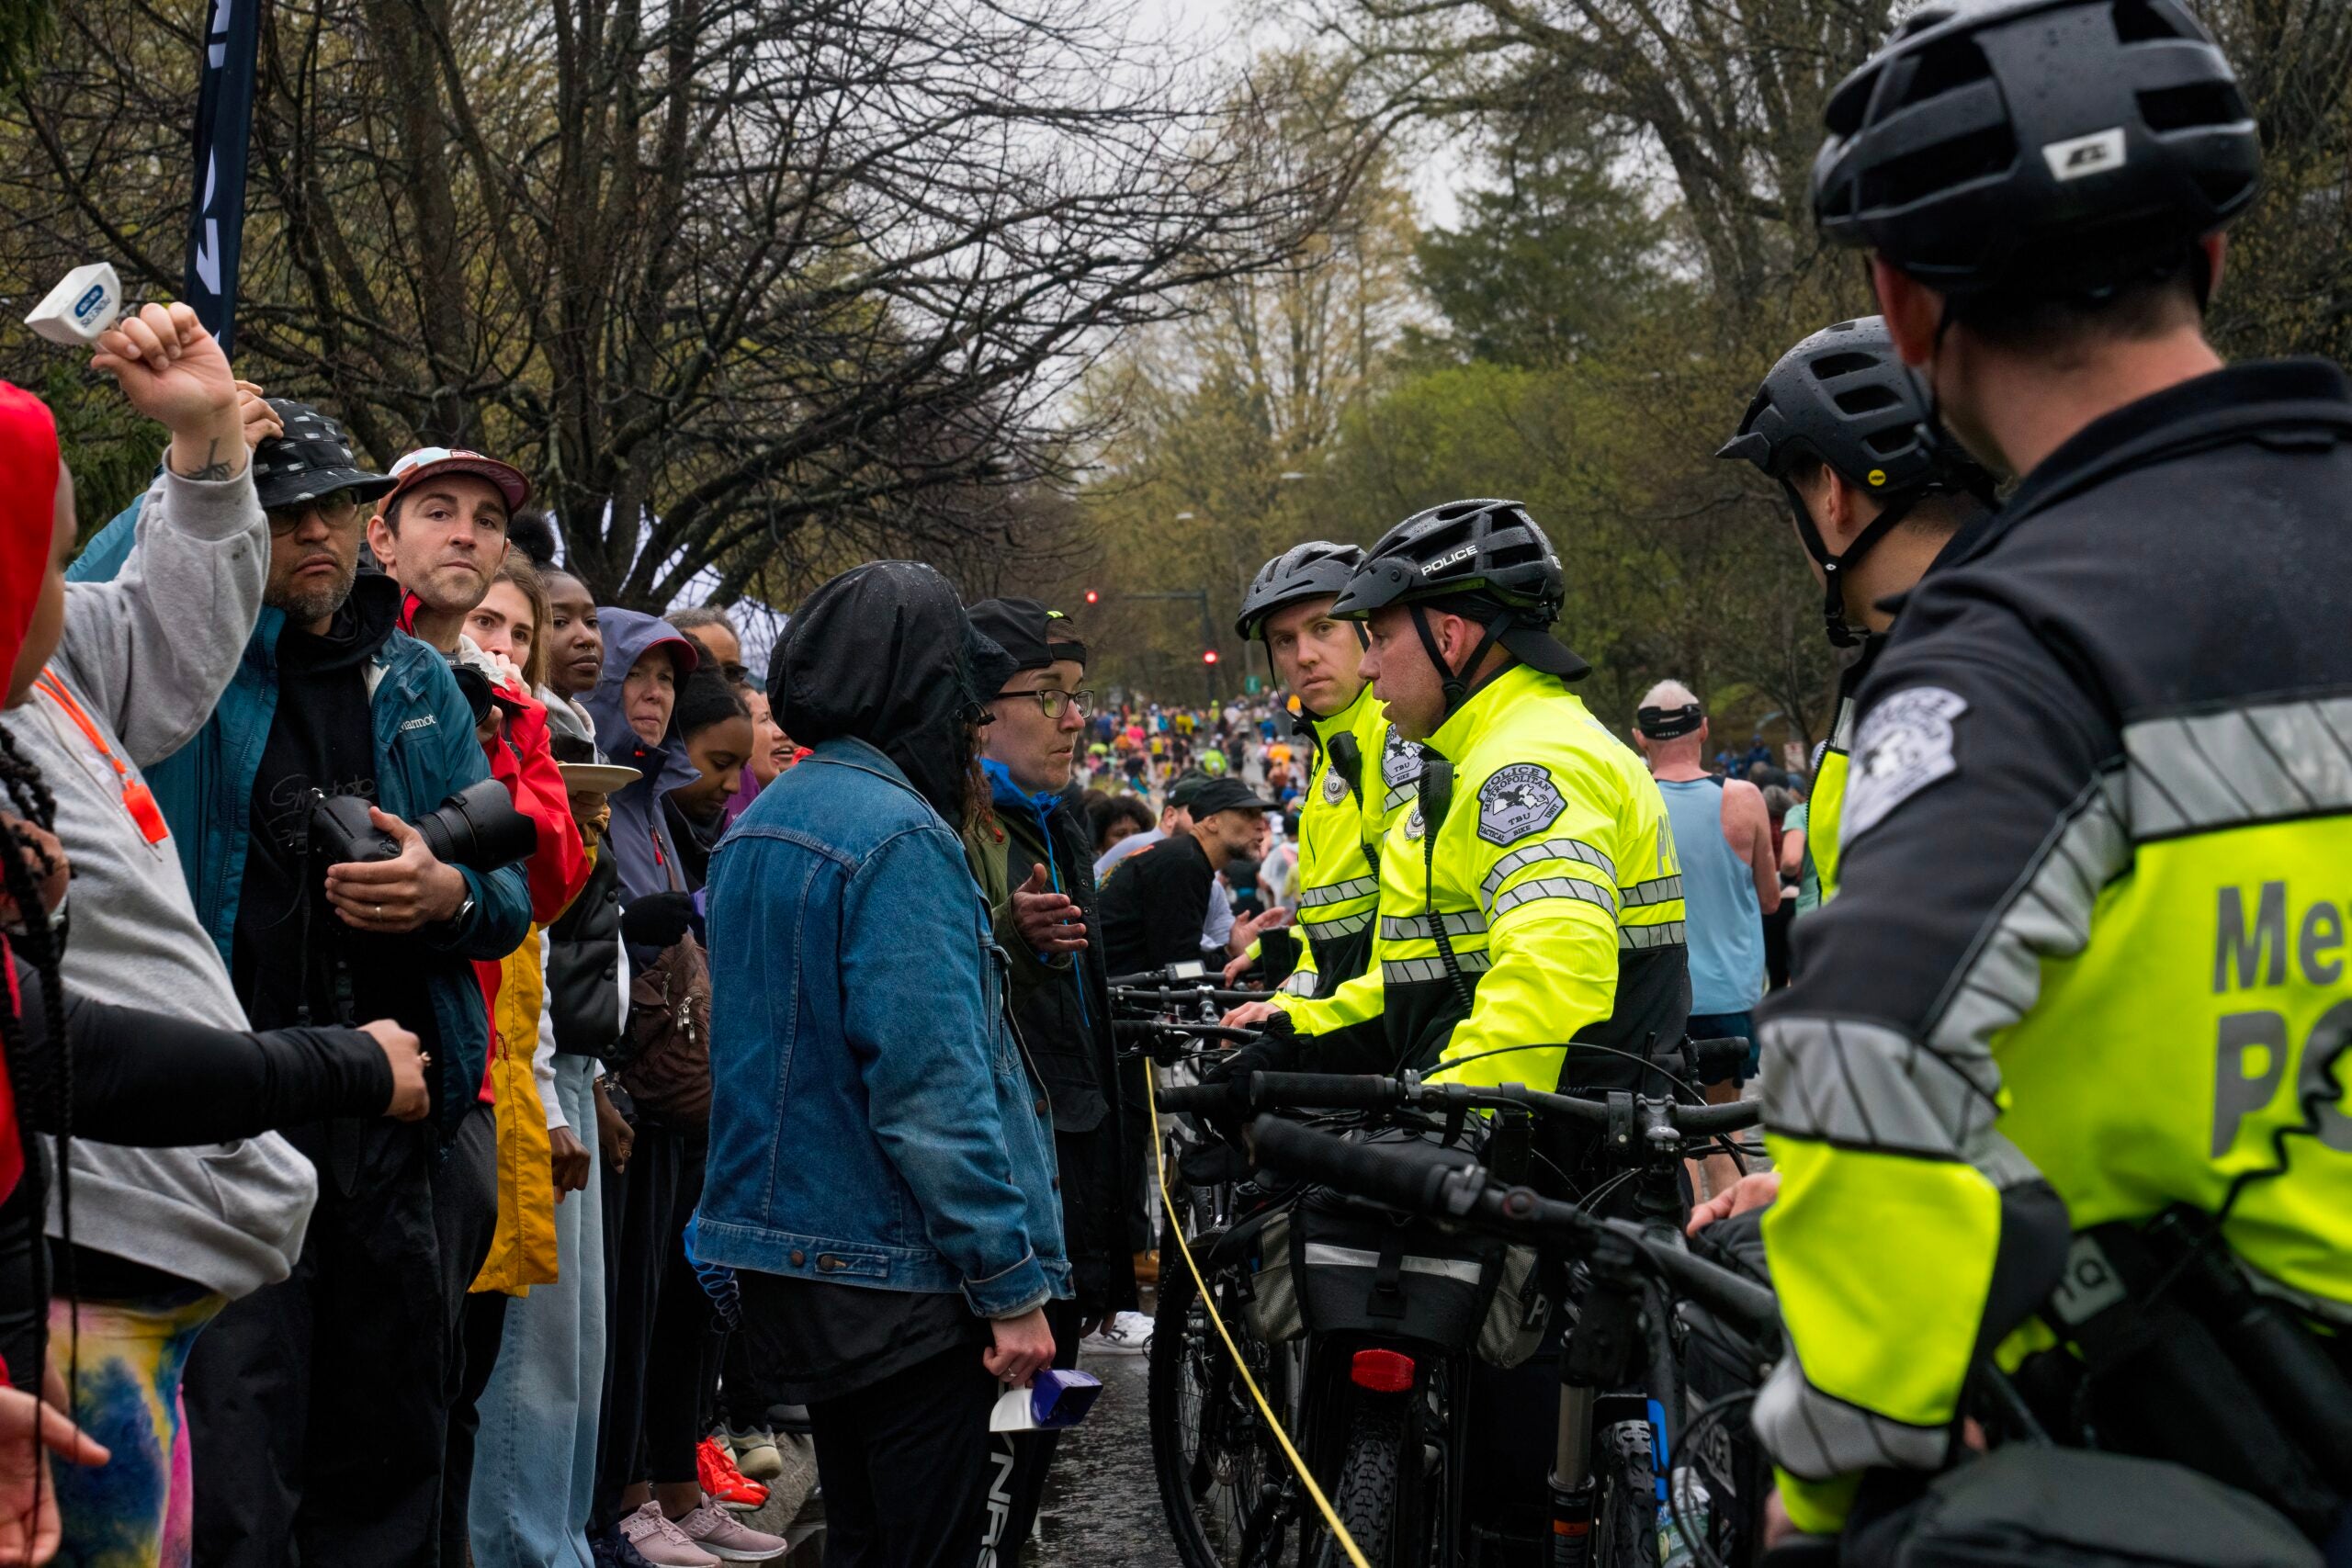 Marathon spectators are shown dressed for wet and chilly weather on one side of a rope barrier. On the other side, several police officers in fluorescent yellow jackets and helmets stand holding bicycles, blocking the spectators from the marathon course.